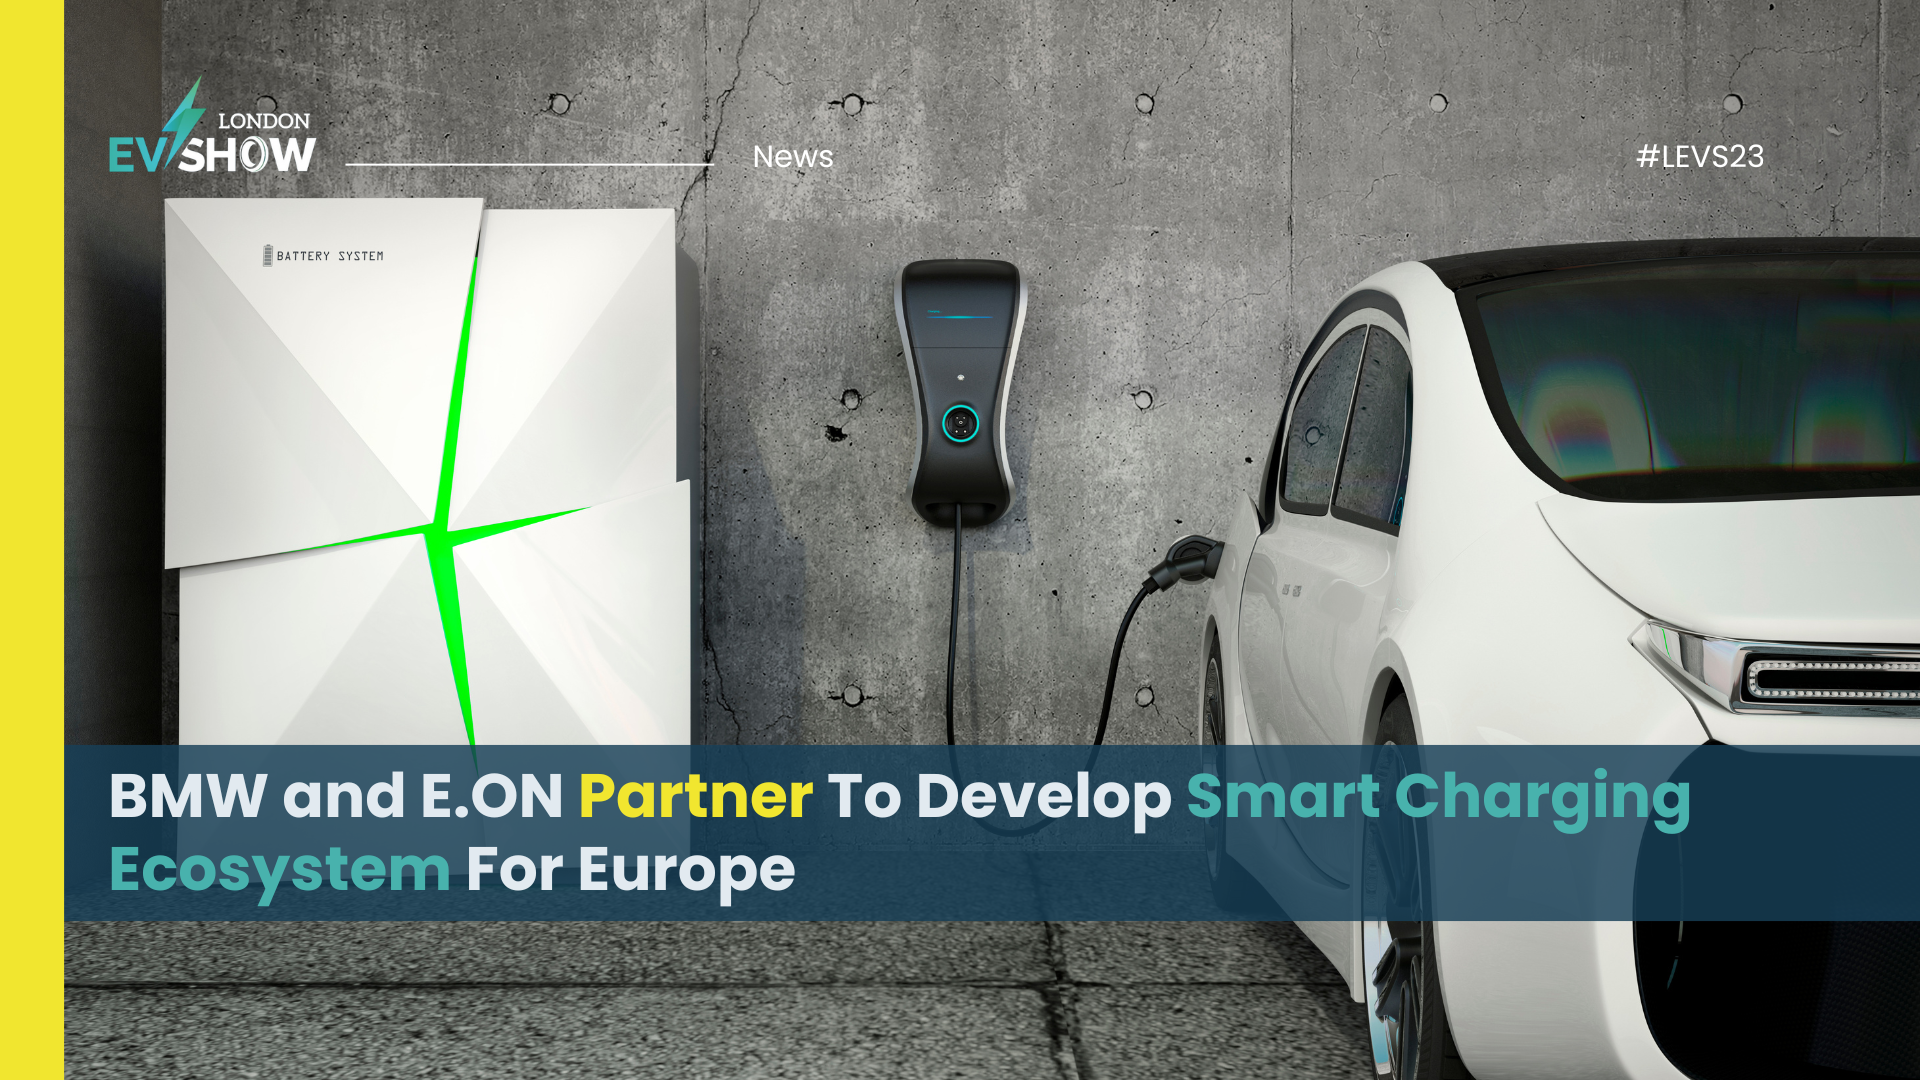 BMW and E.ON Partner To Develop Smart Charging Ecosystem For Europe